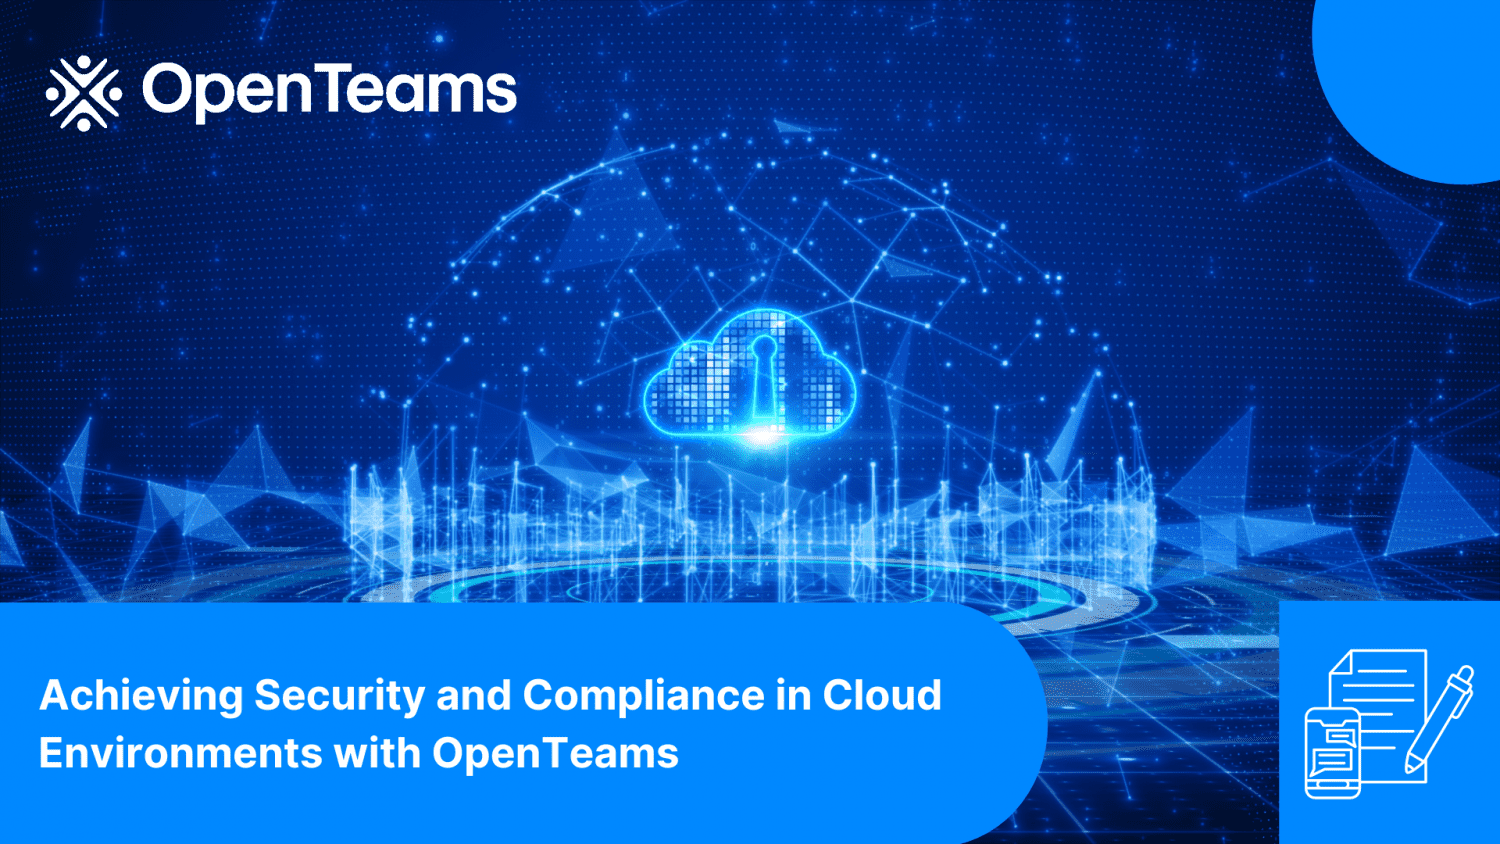 Achieving Security and Compliance in Cloud Environments with OpenTeams